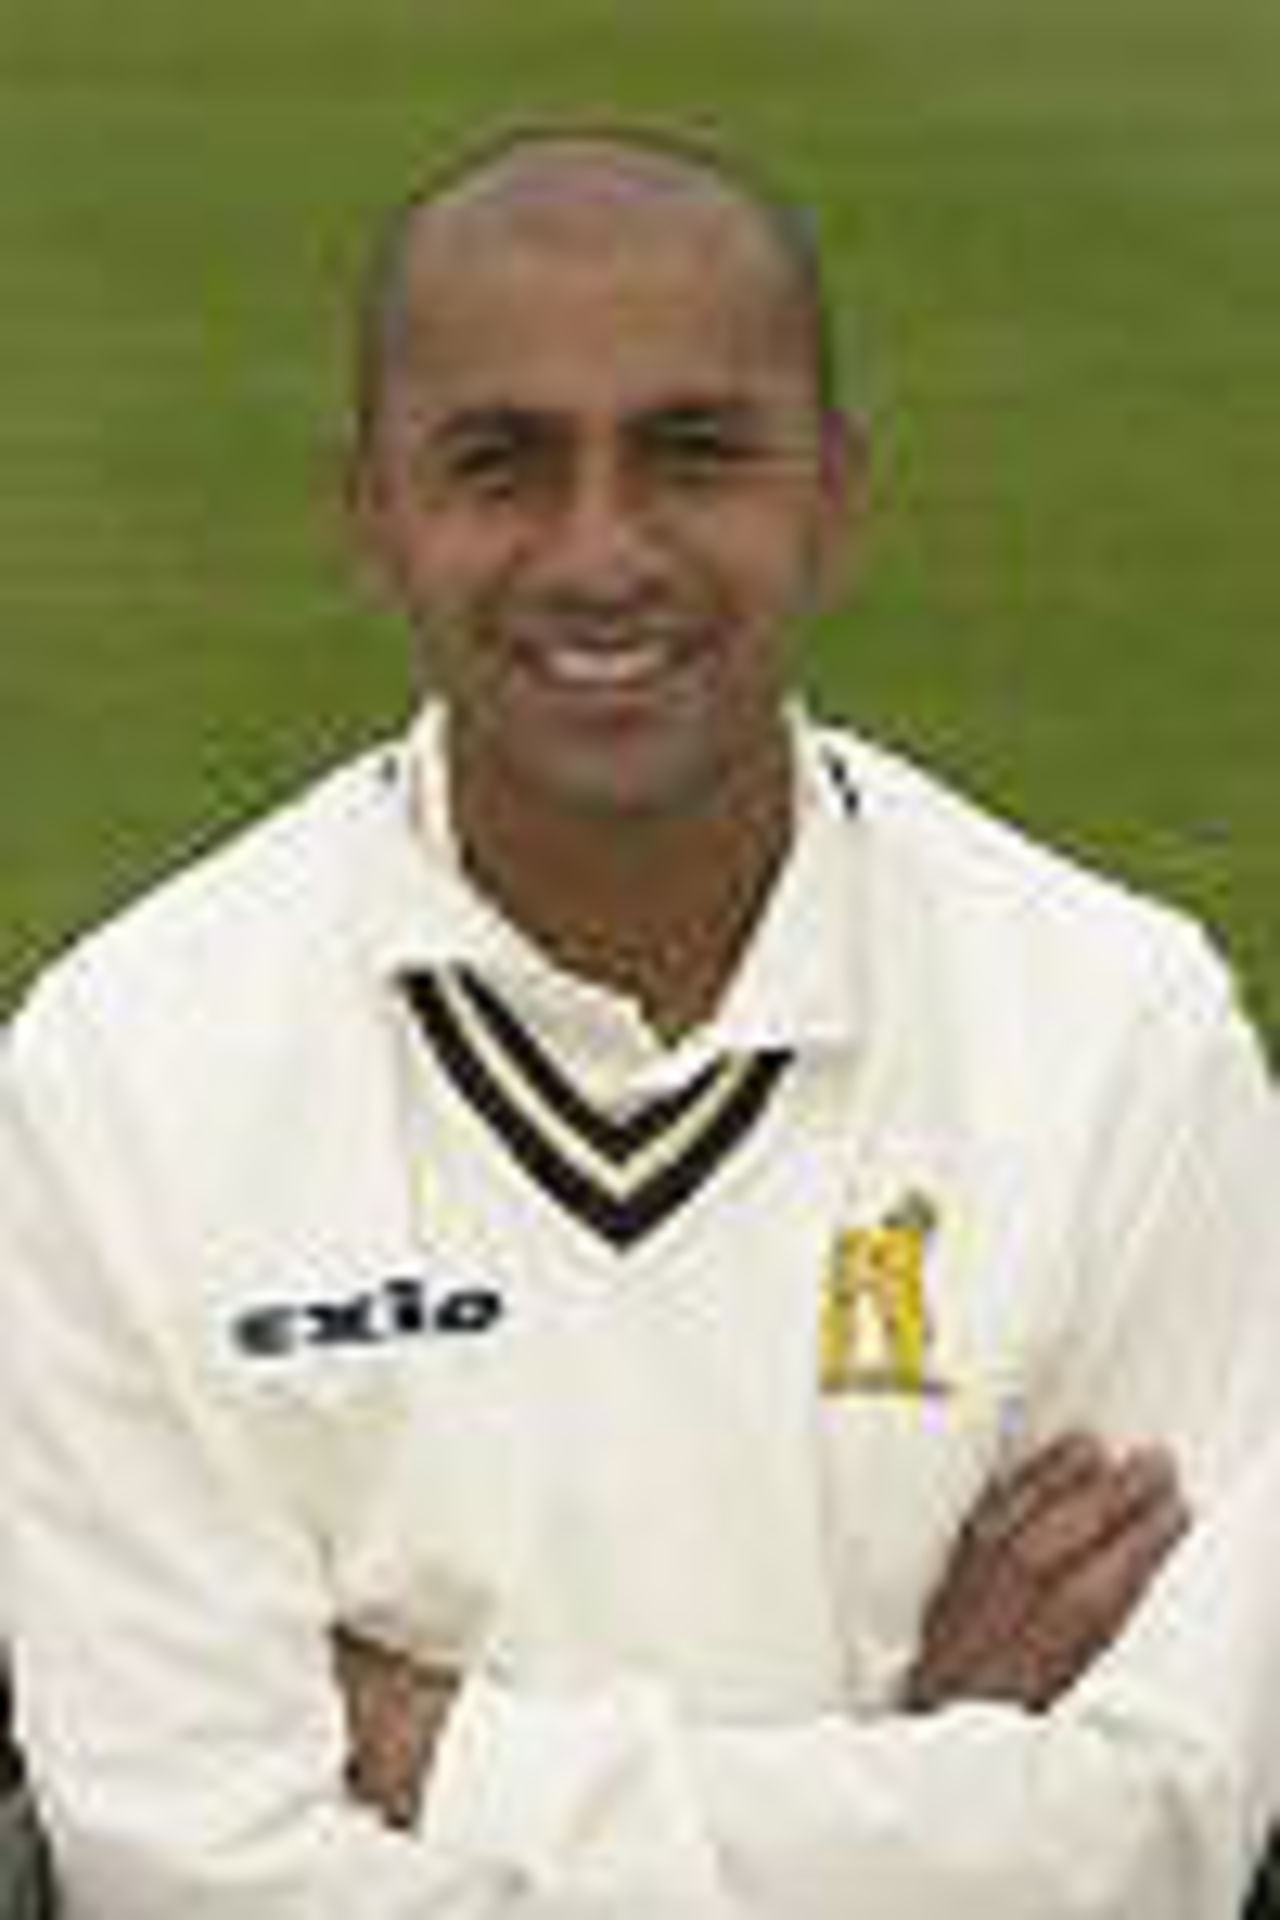 Taken at the 2002 Warwickshire CCC photocall